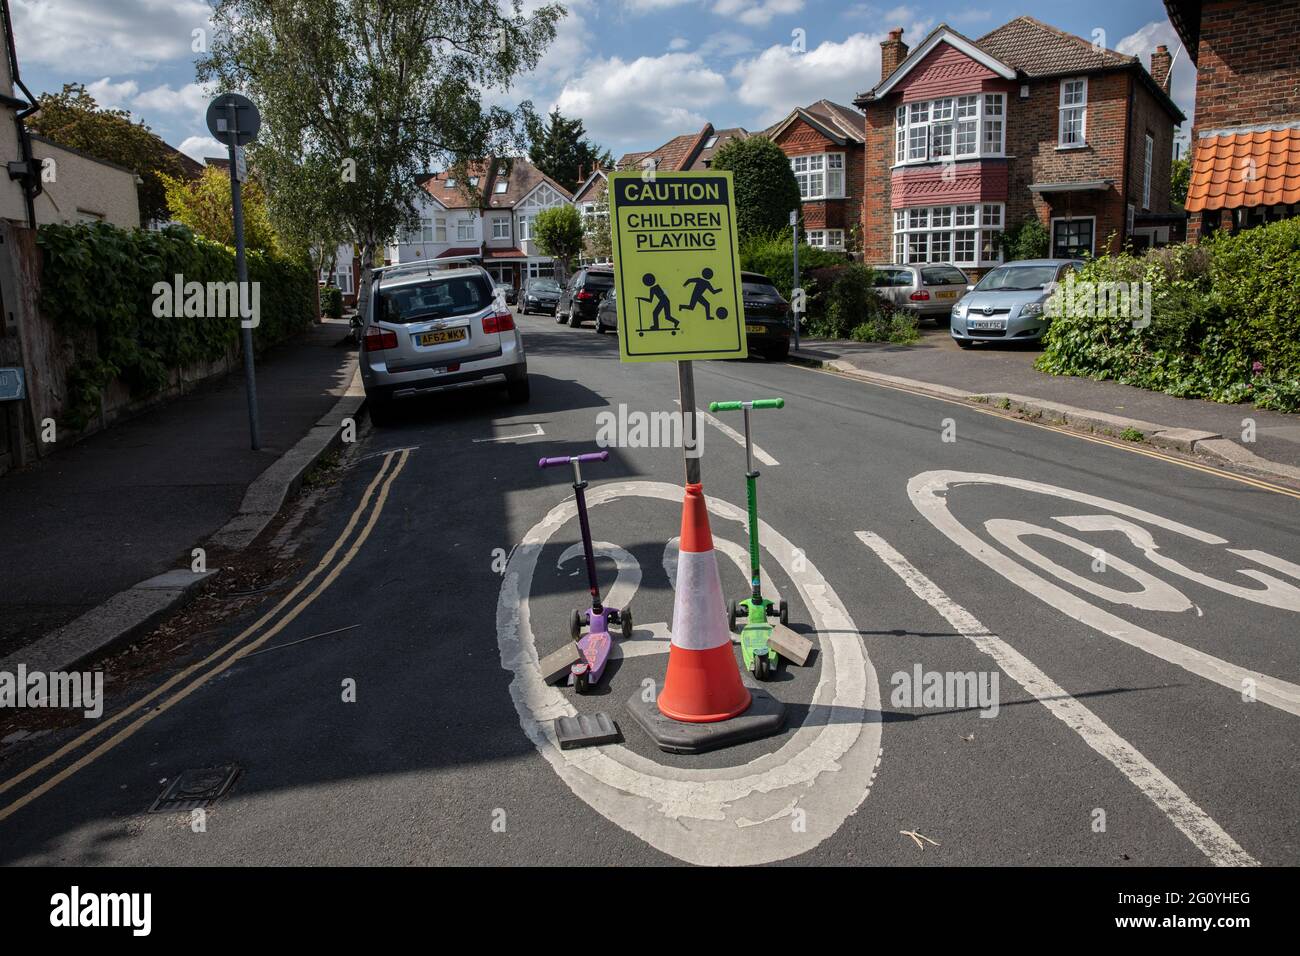 CAUTION Children playing sign positioned to slow traffic down at the entrance to residential cul-de-sac, England, United Kingdom Stock Photo